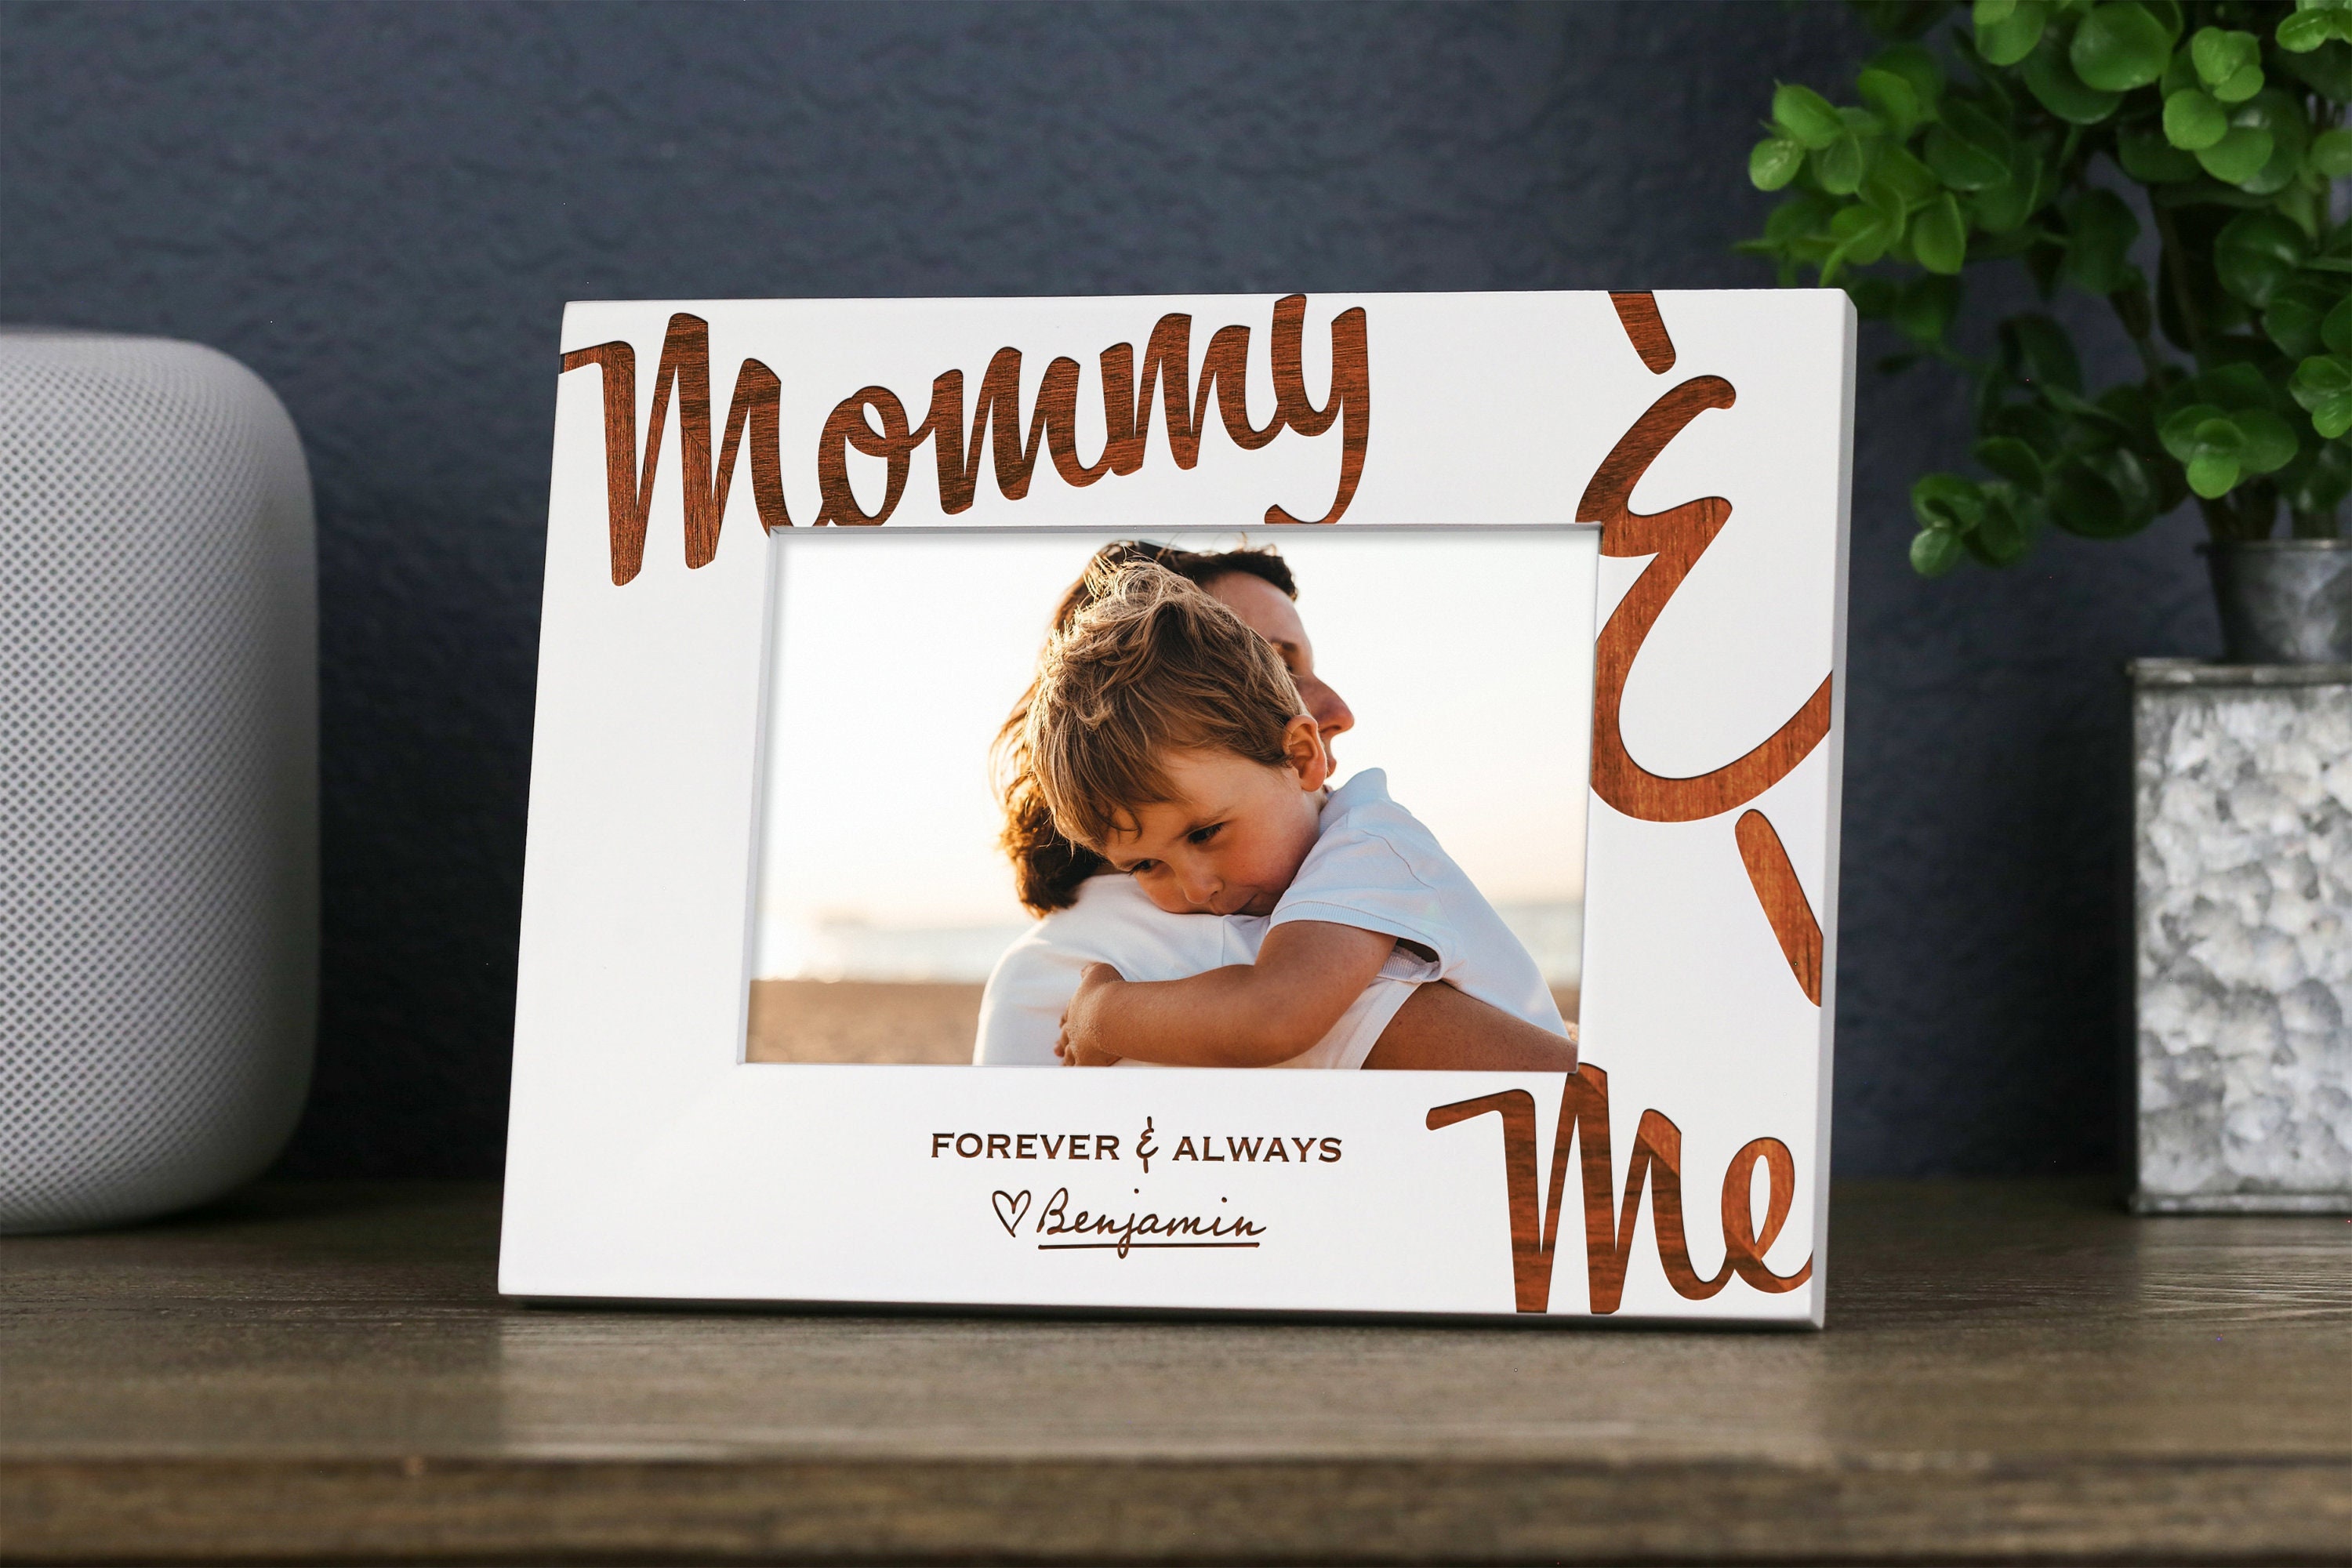 KU-DaYi Mother Gifts Picture Frame,Mom Mother Birthday Mothers Day Gifts  From Son Daughter Kids Children,Madre Wall & Tabletop Photo Frame